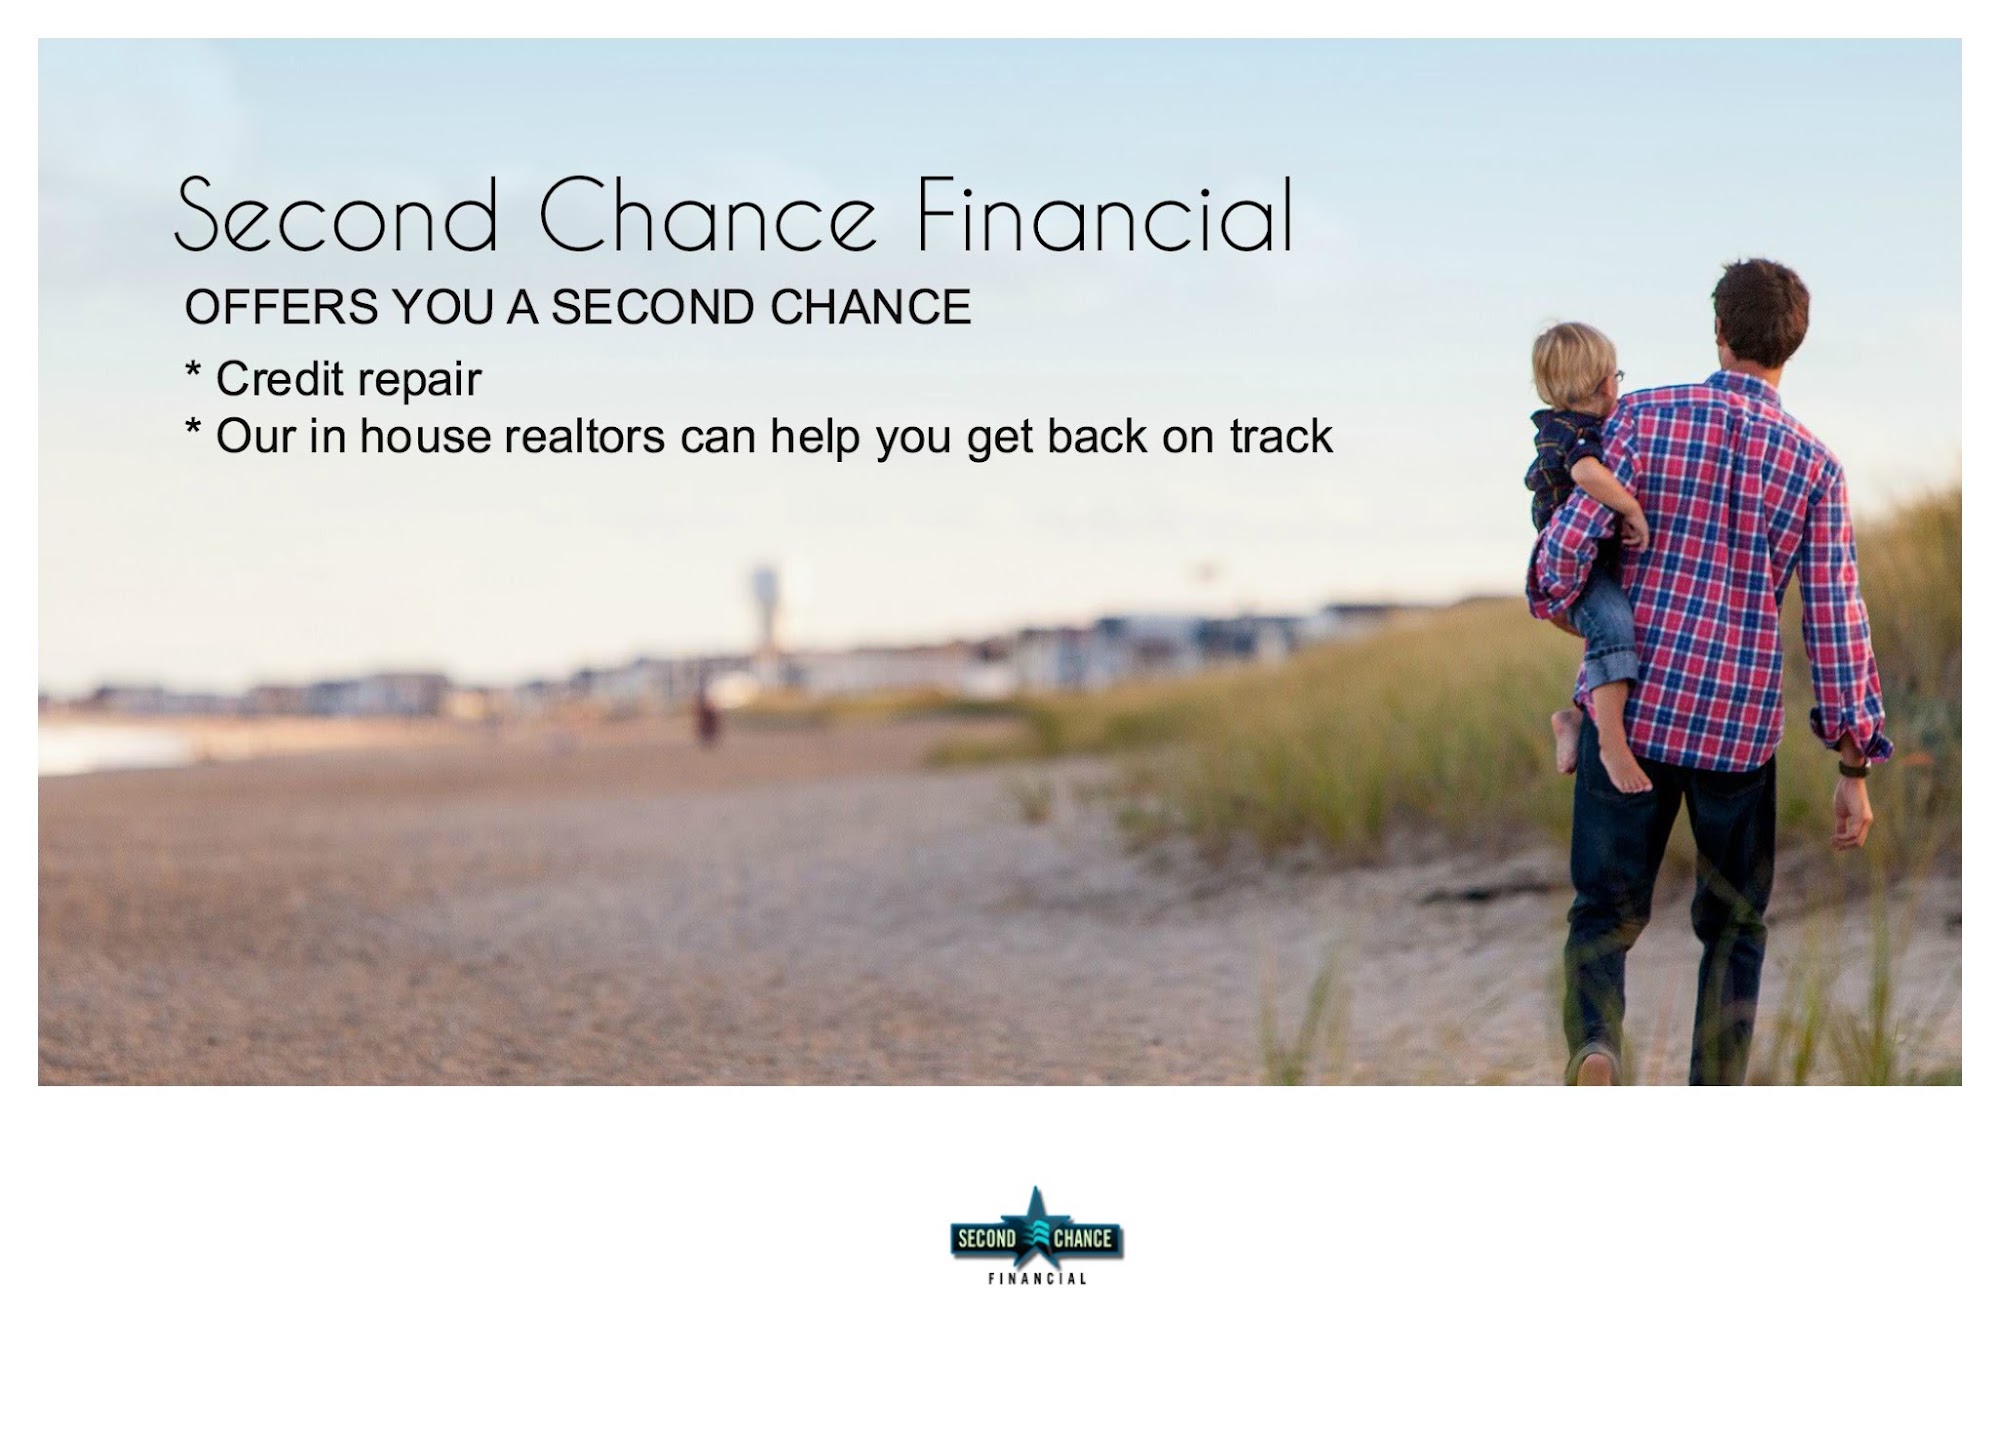 Second Chance Financial